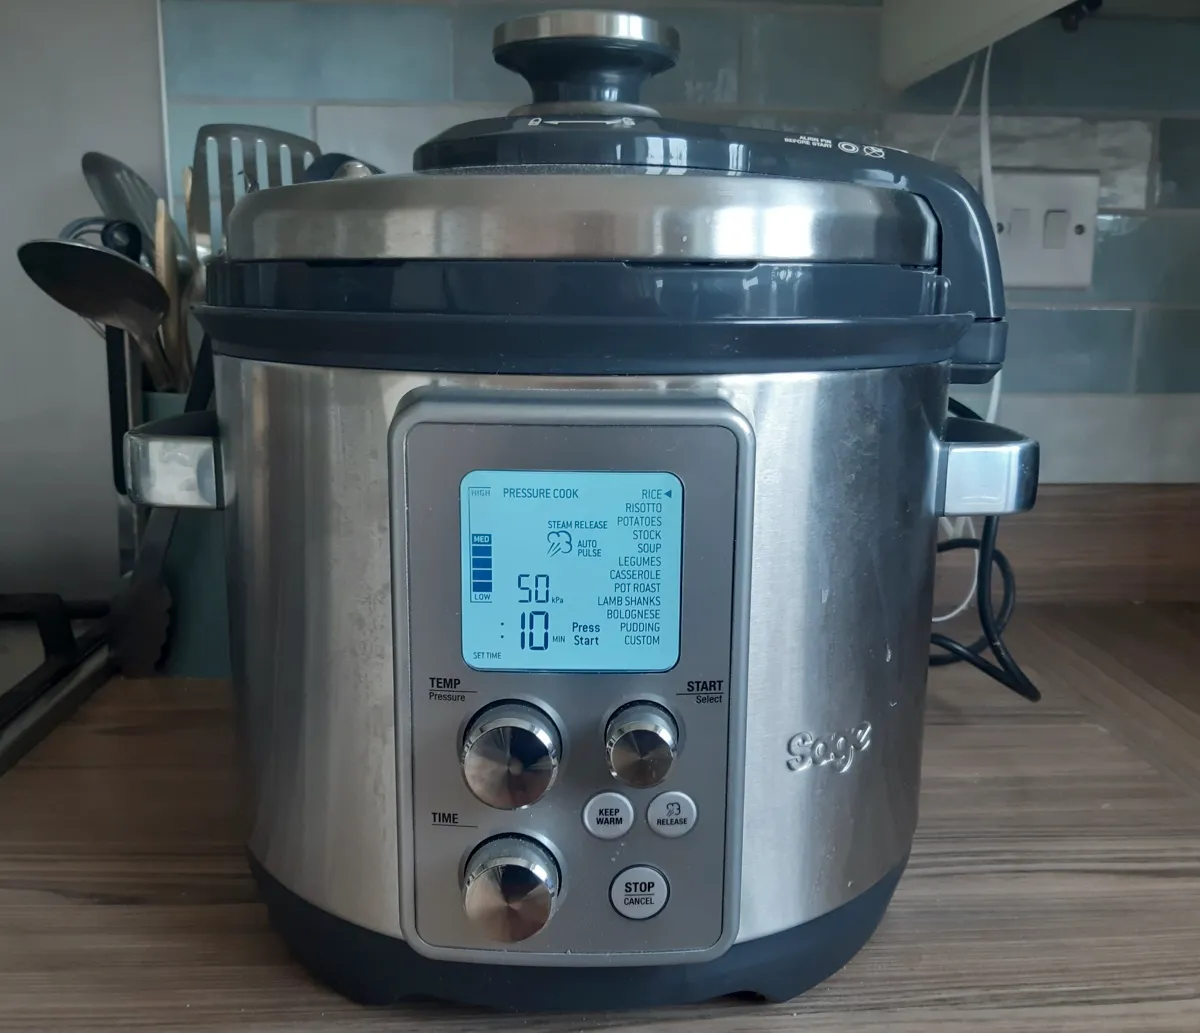  Breville BPR700BSS Fast Slow Pro Slow Cooker, Brushed Stainless  Steel: Home & Kitchen